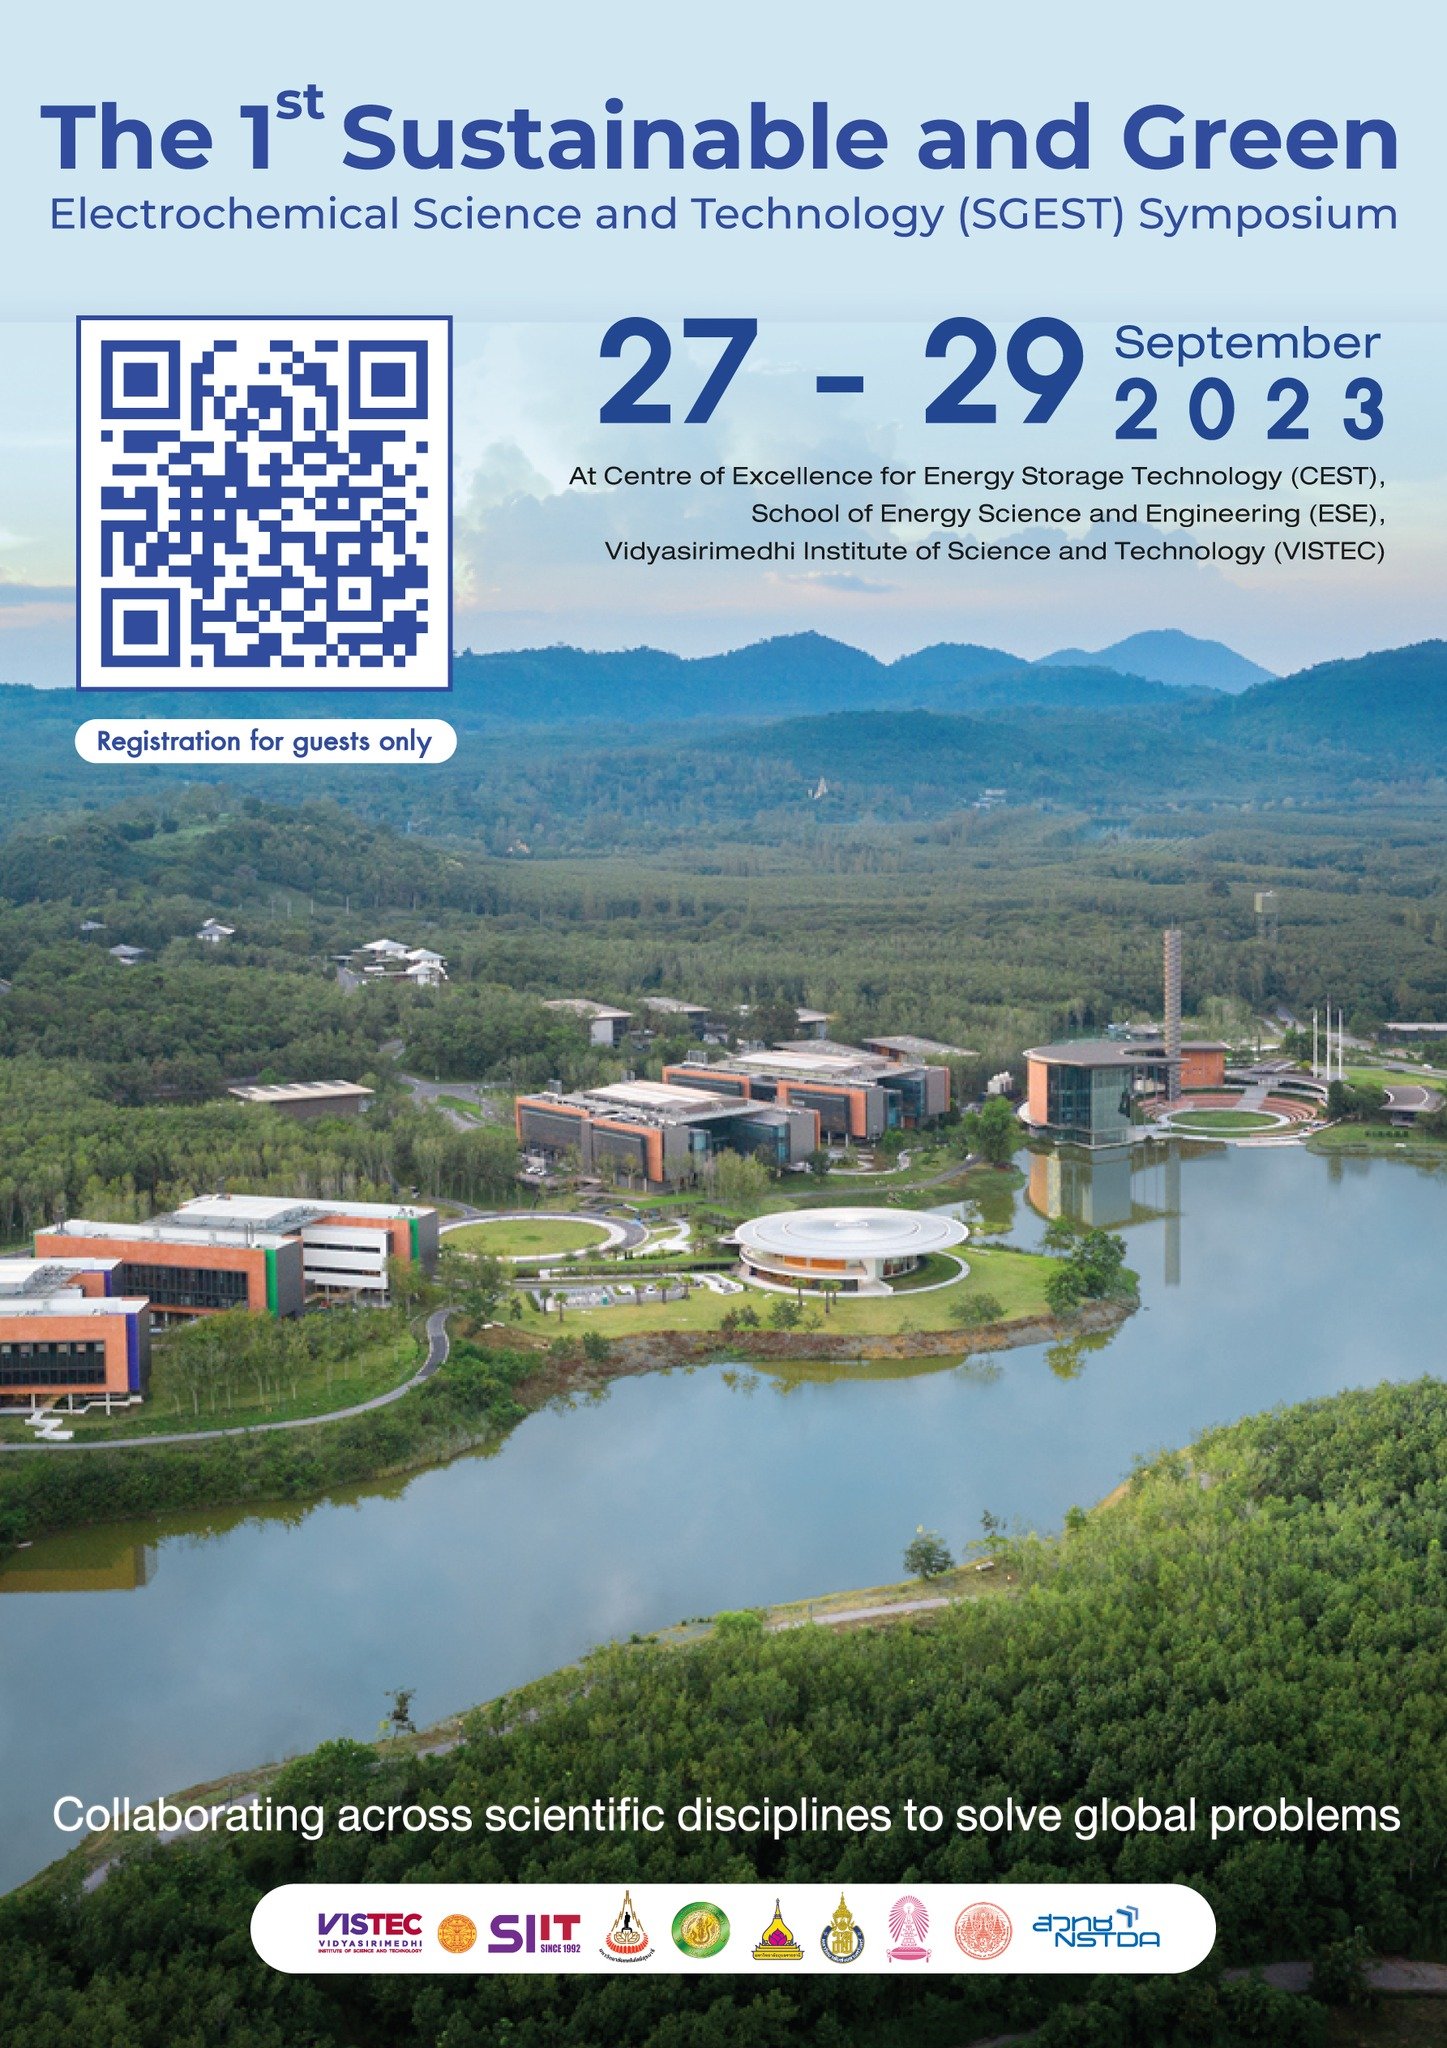 The 1st Symposium on Sustainable and Green Electrochemical Science and Technology (SGEST)